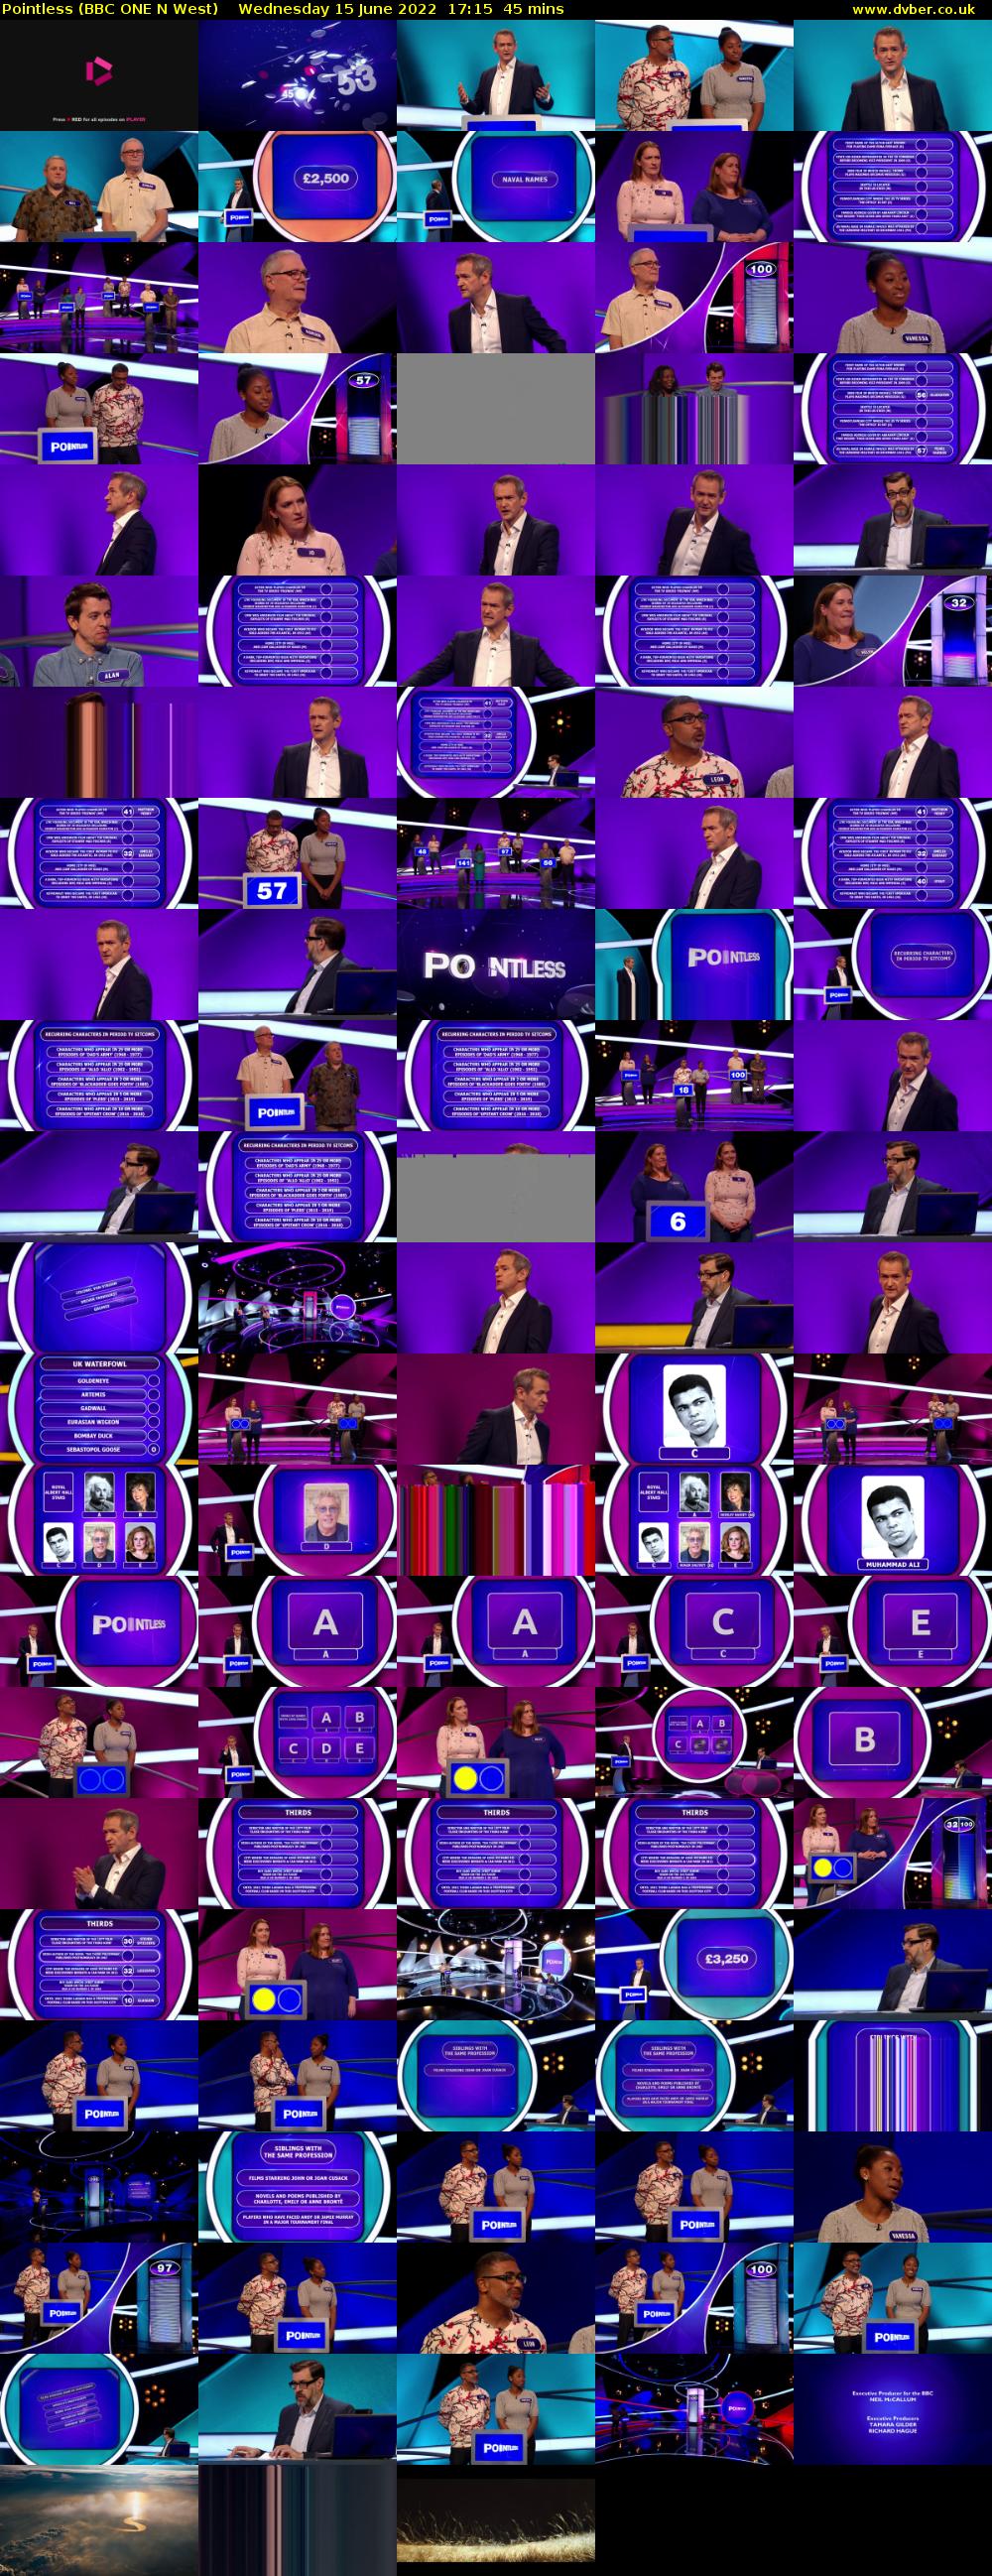 Pointless (BBC ONE N West) Wednesday 15 June 2022 17:15 - 18:00